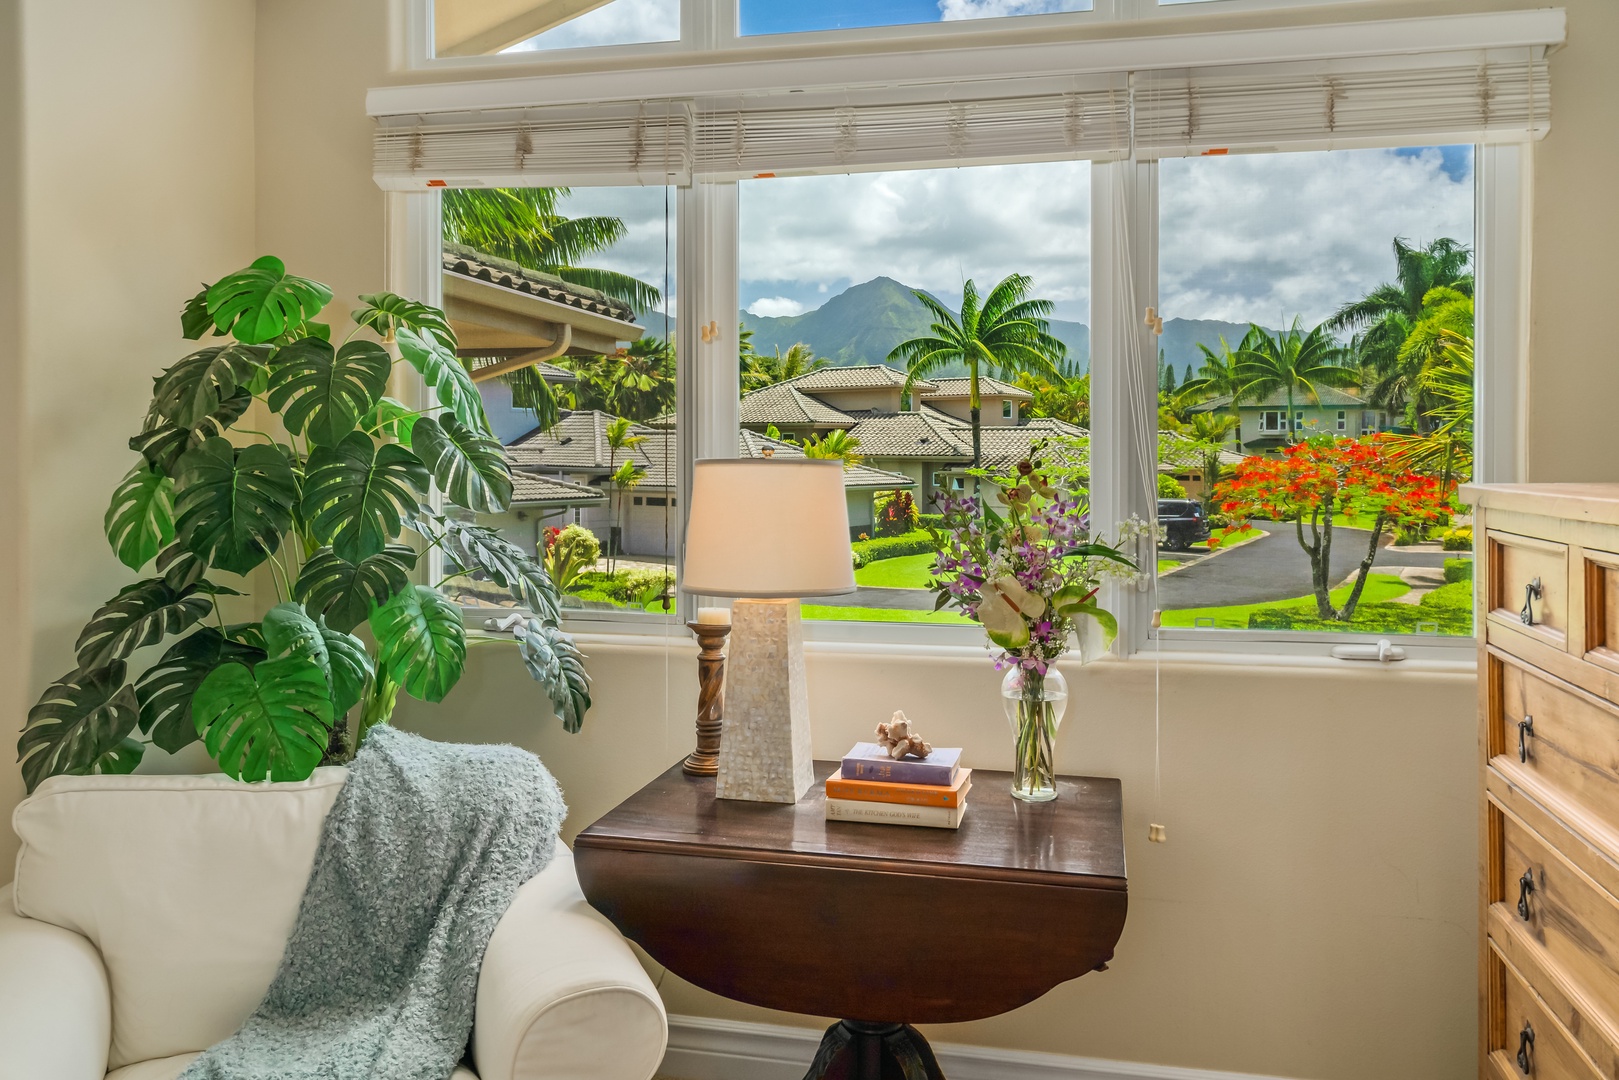 Princeville Vacation Rentals, Noelani Kai - Immerse yourself in Hawaii's majestic mountain views, a true feast for the eyes from our home.